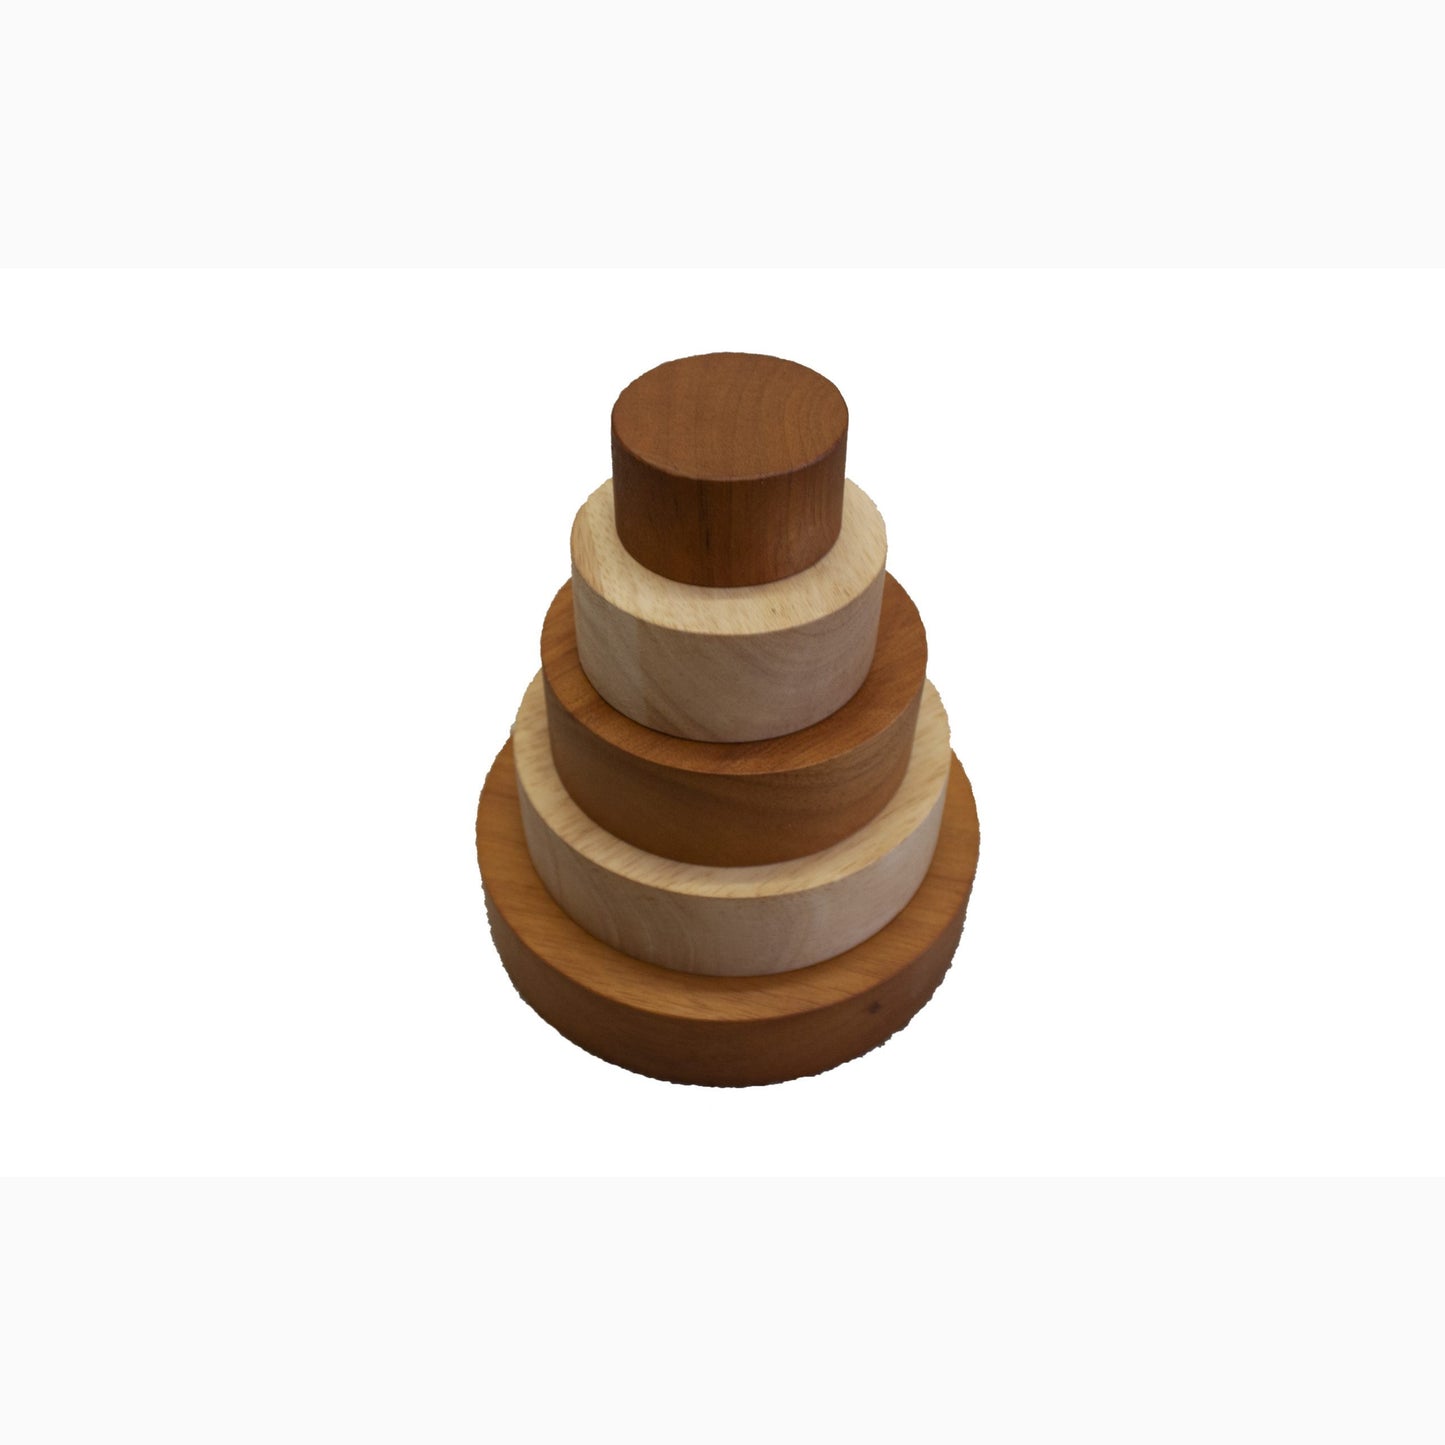 Dual-Tone Wooden Nesting and Stacking Bowl Set